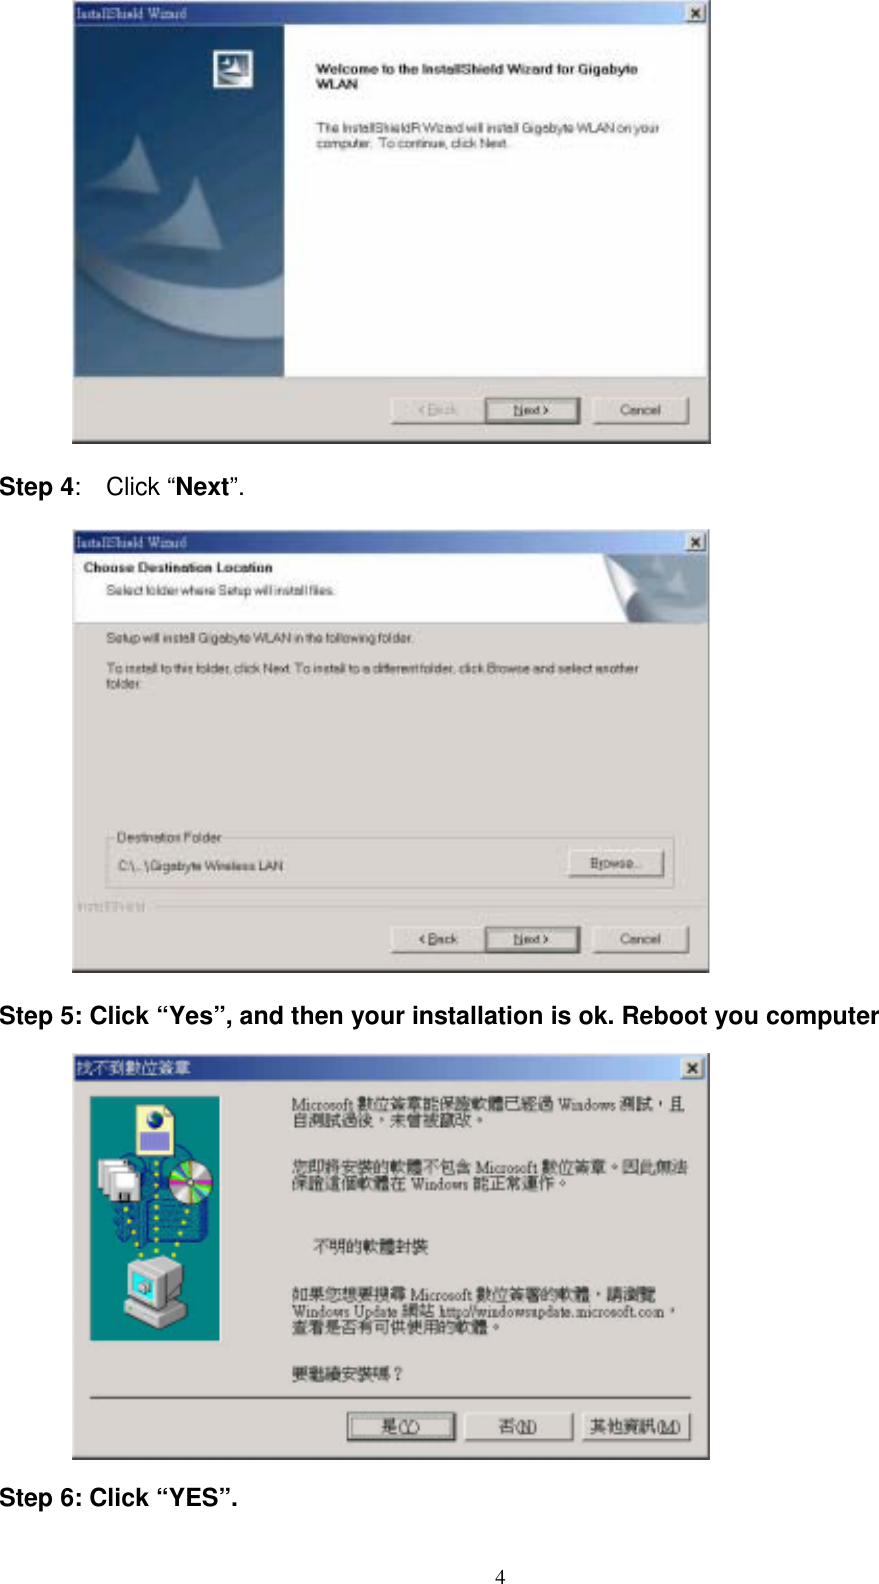           Step 4:  Click “Next”.             Step 5: Click “Yes”, and then your installation is ok. Reboot you computer            Step 6: Click “YES”.   4 